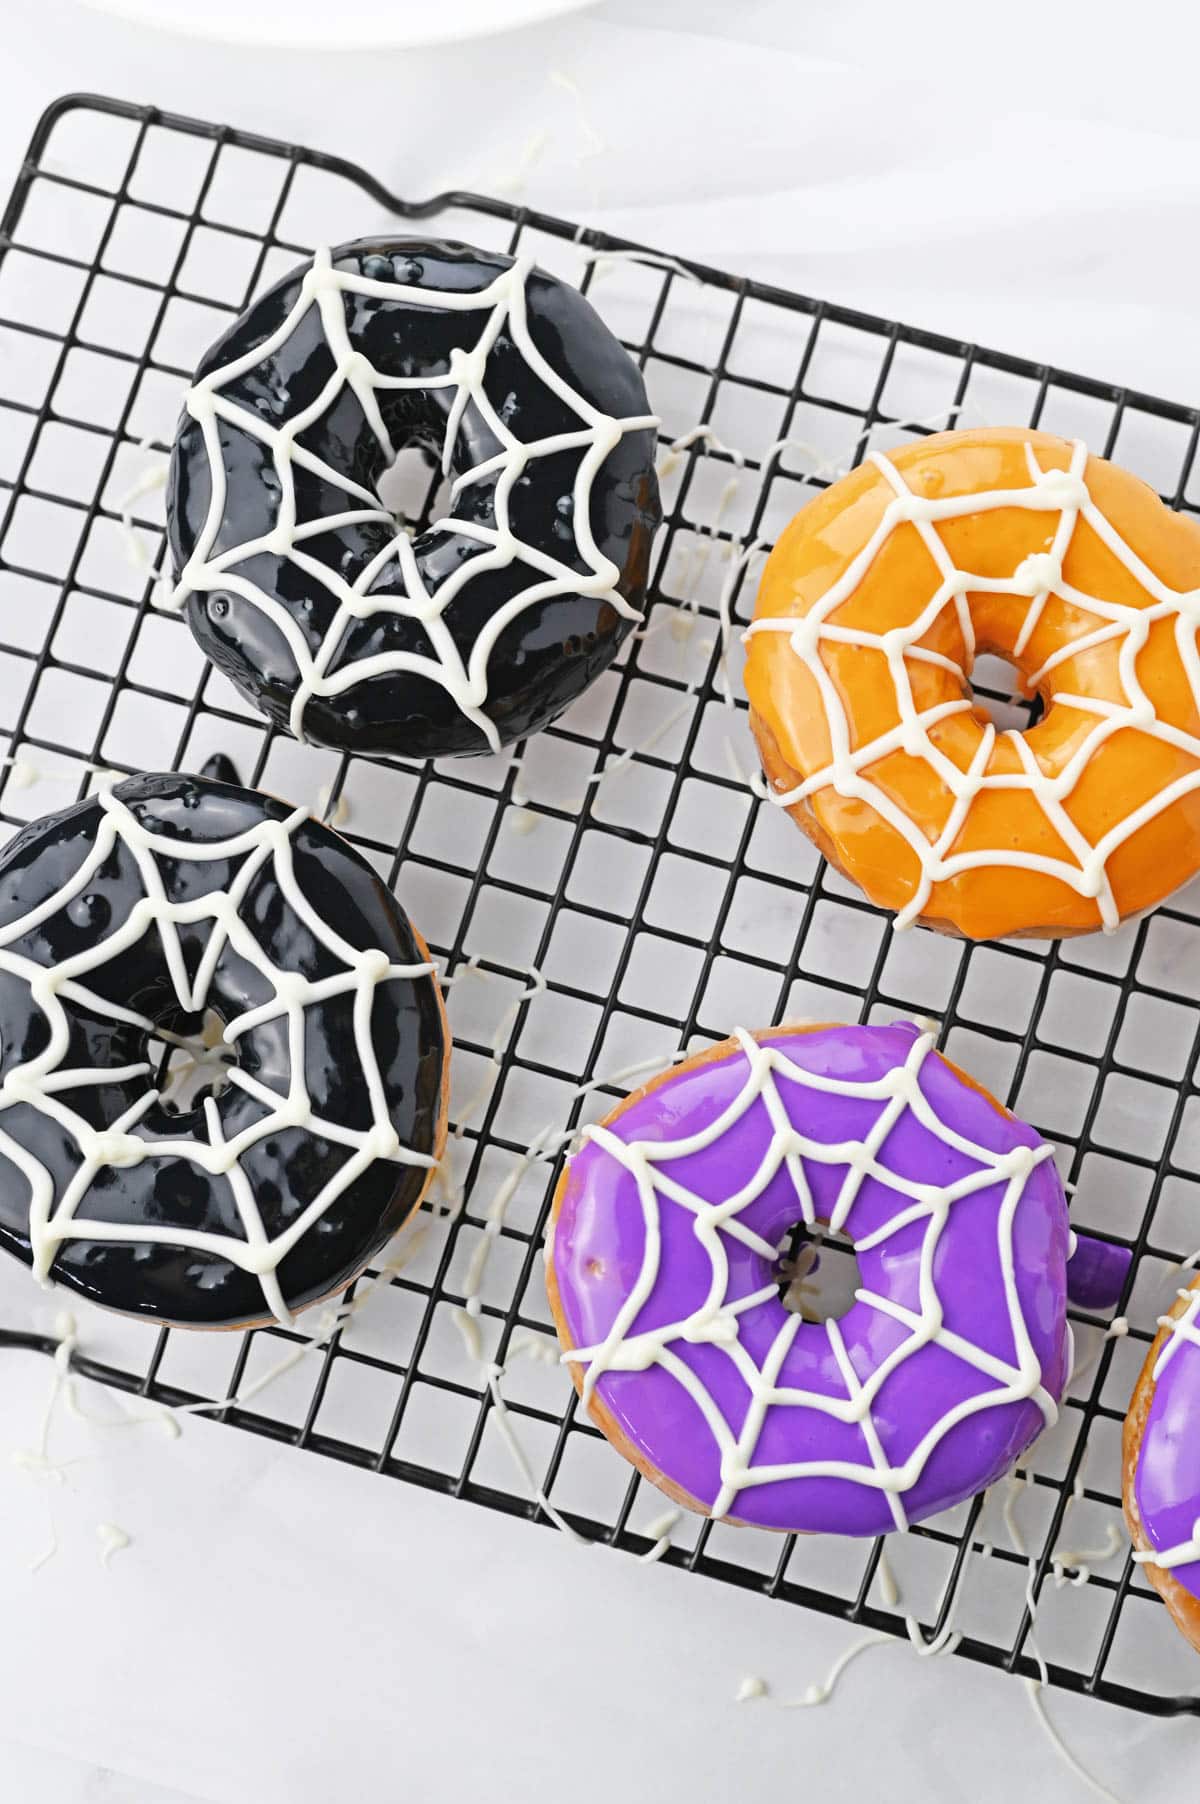 Donuts decorated with white chocolate to look like a spiderweb